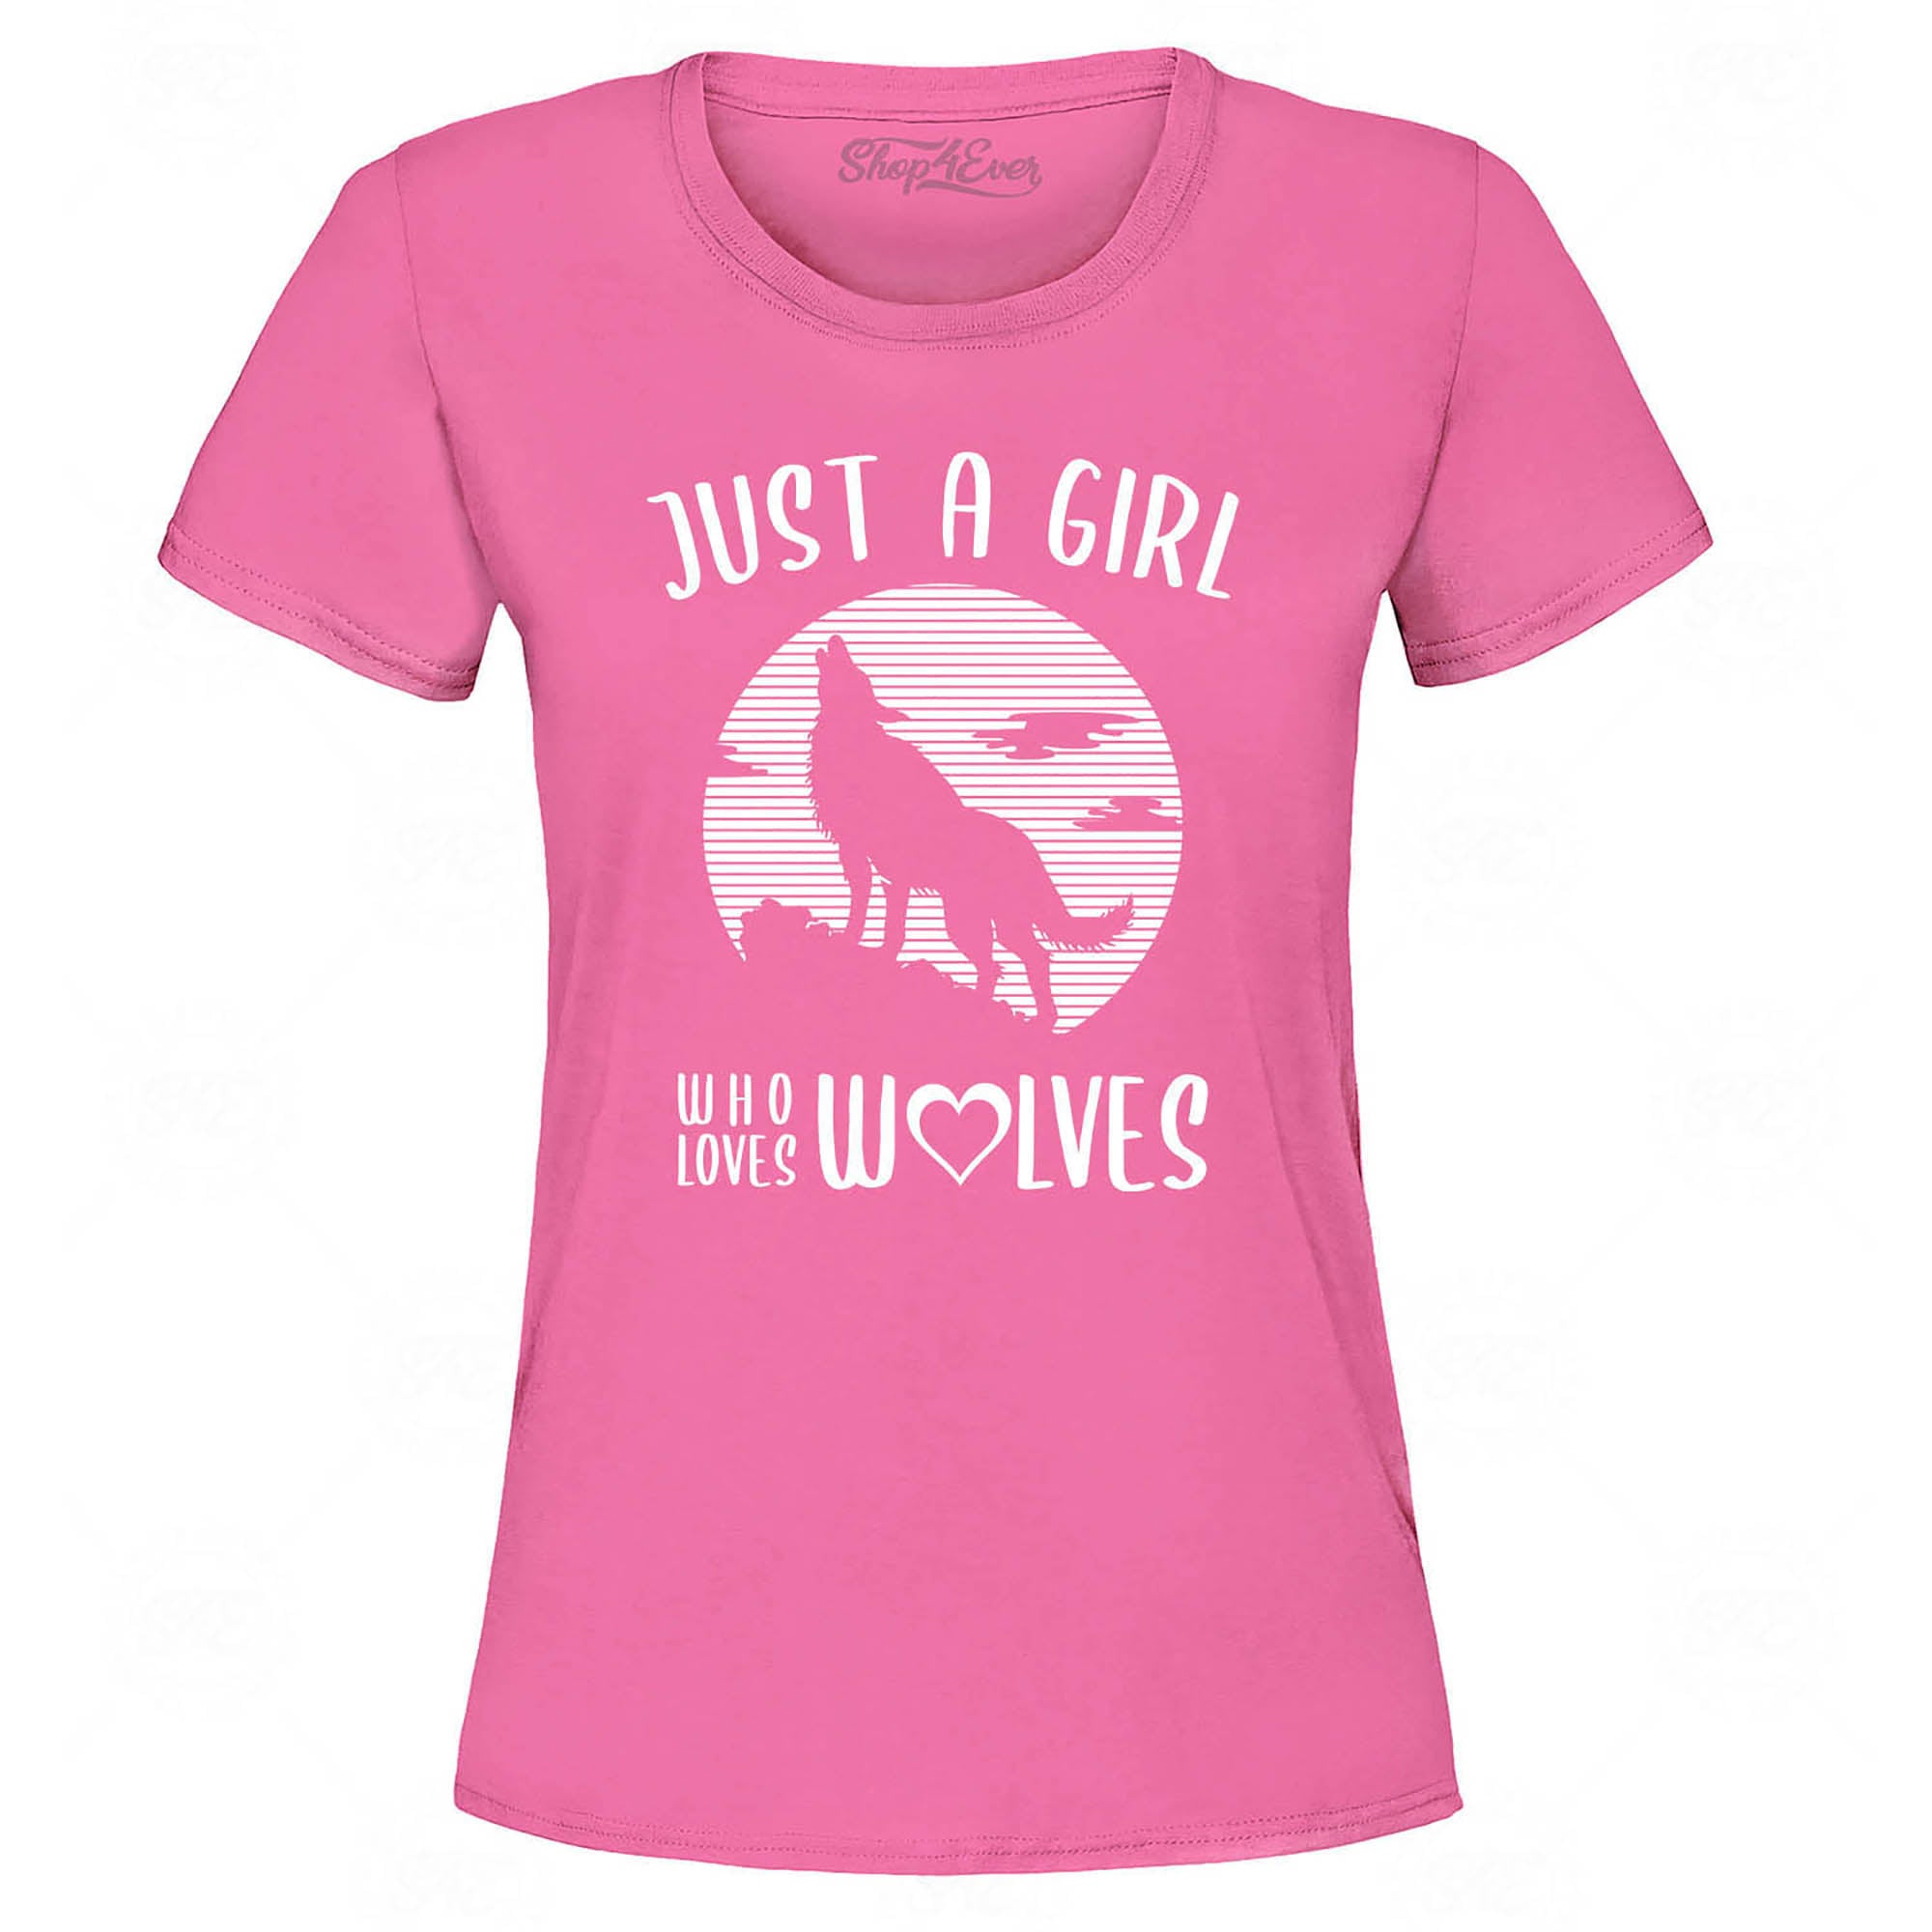 Just A Girl Who Loves Wolves Women's T-Shirt